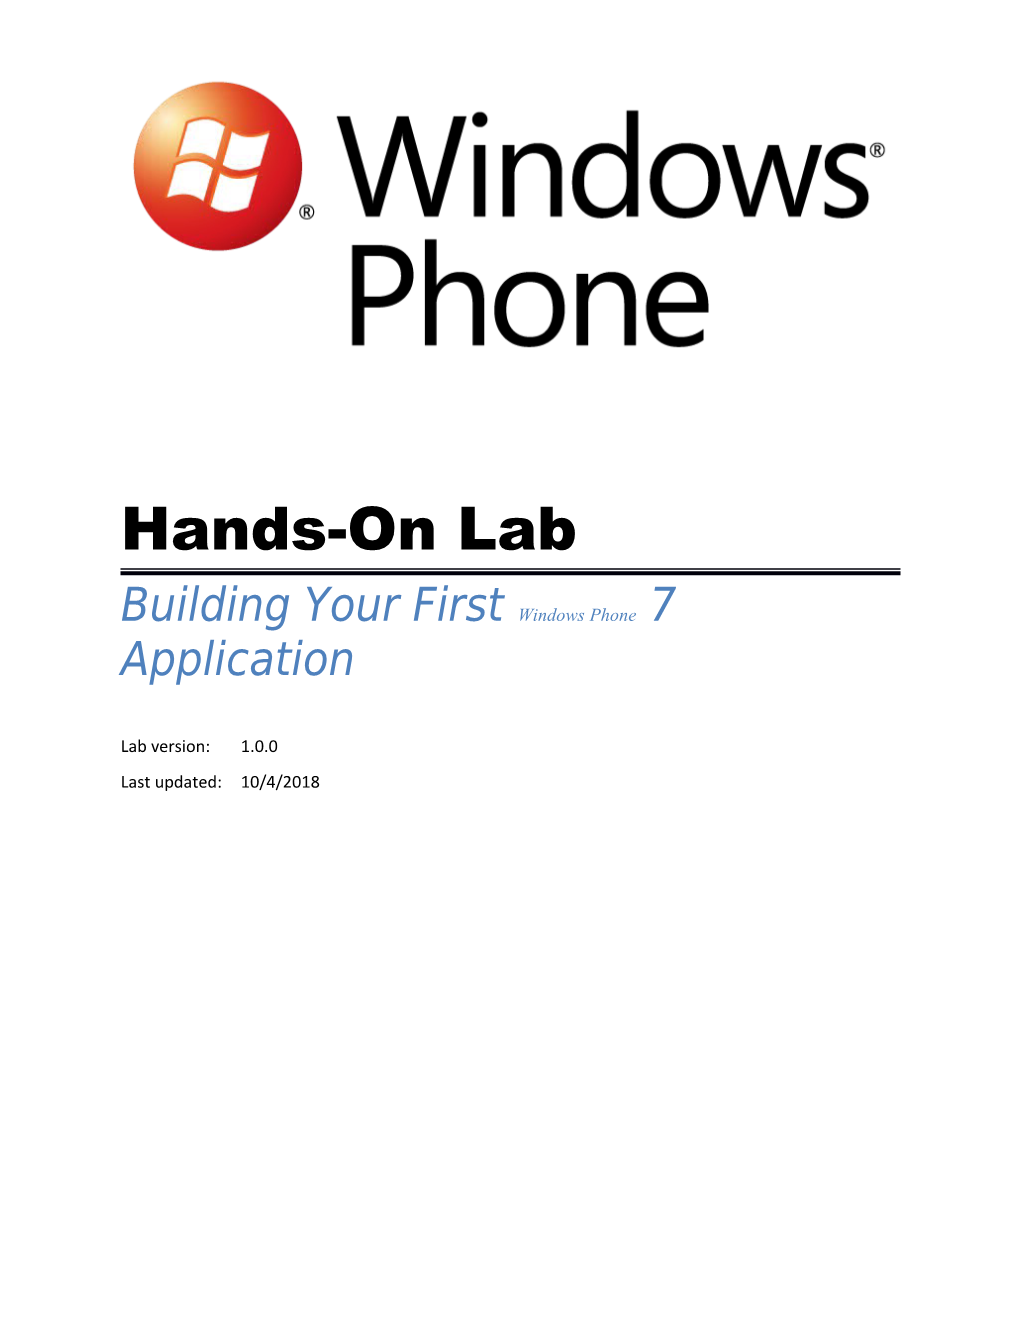 Building Your First Windows Phone 7 Application